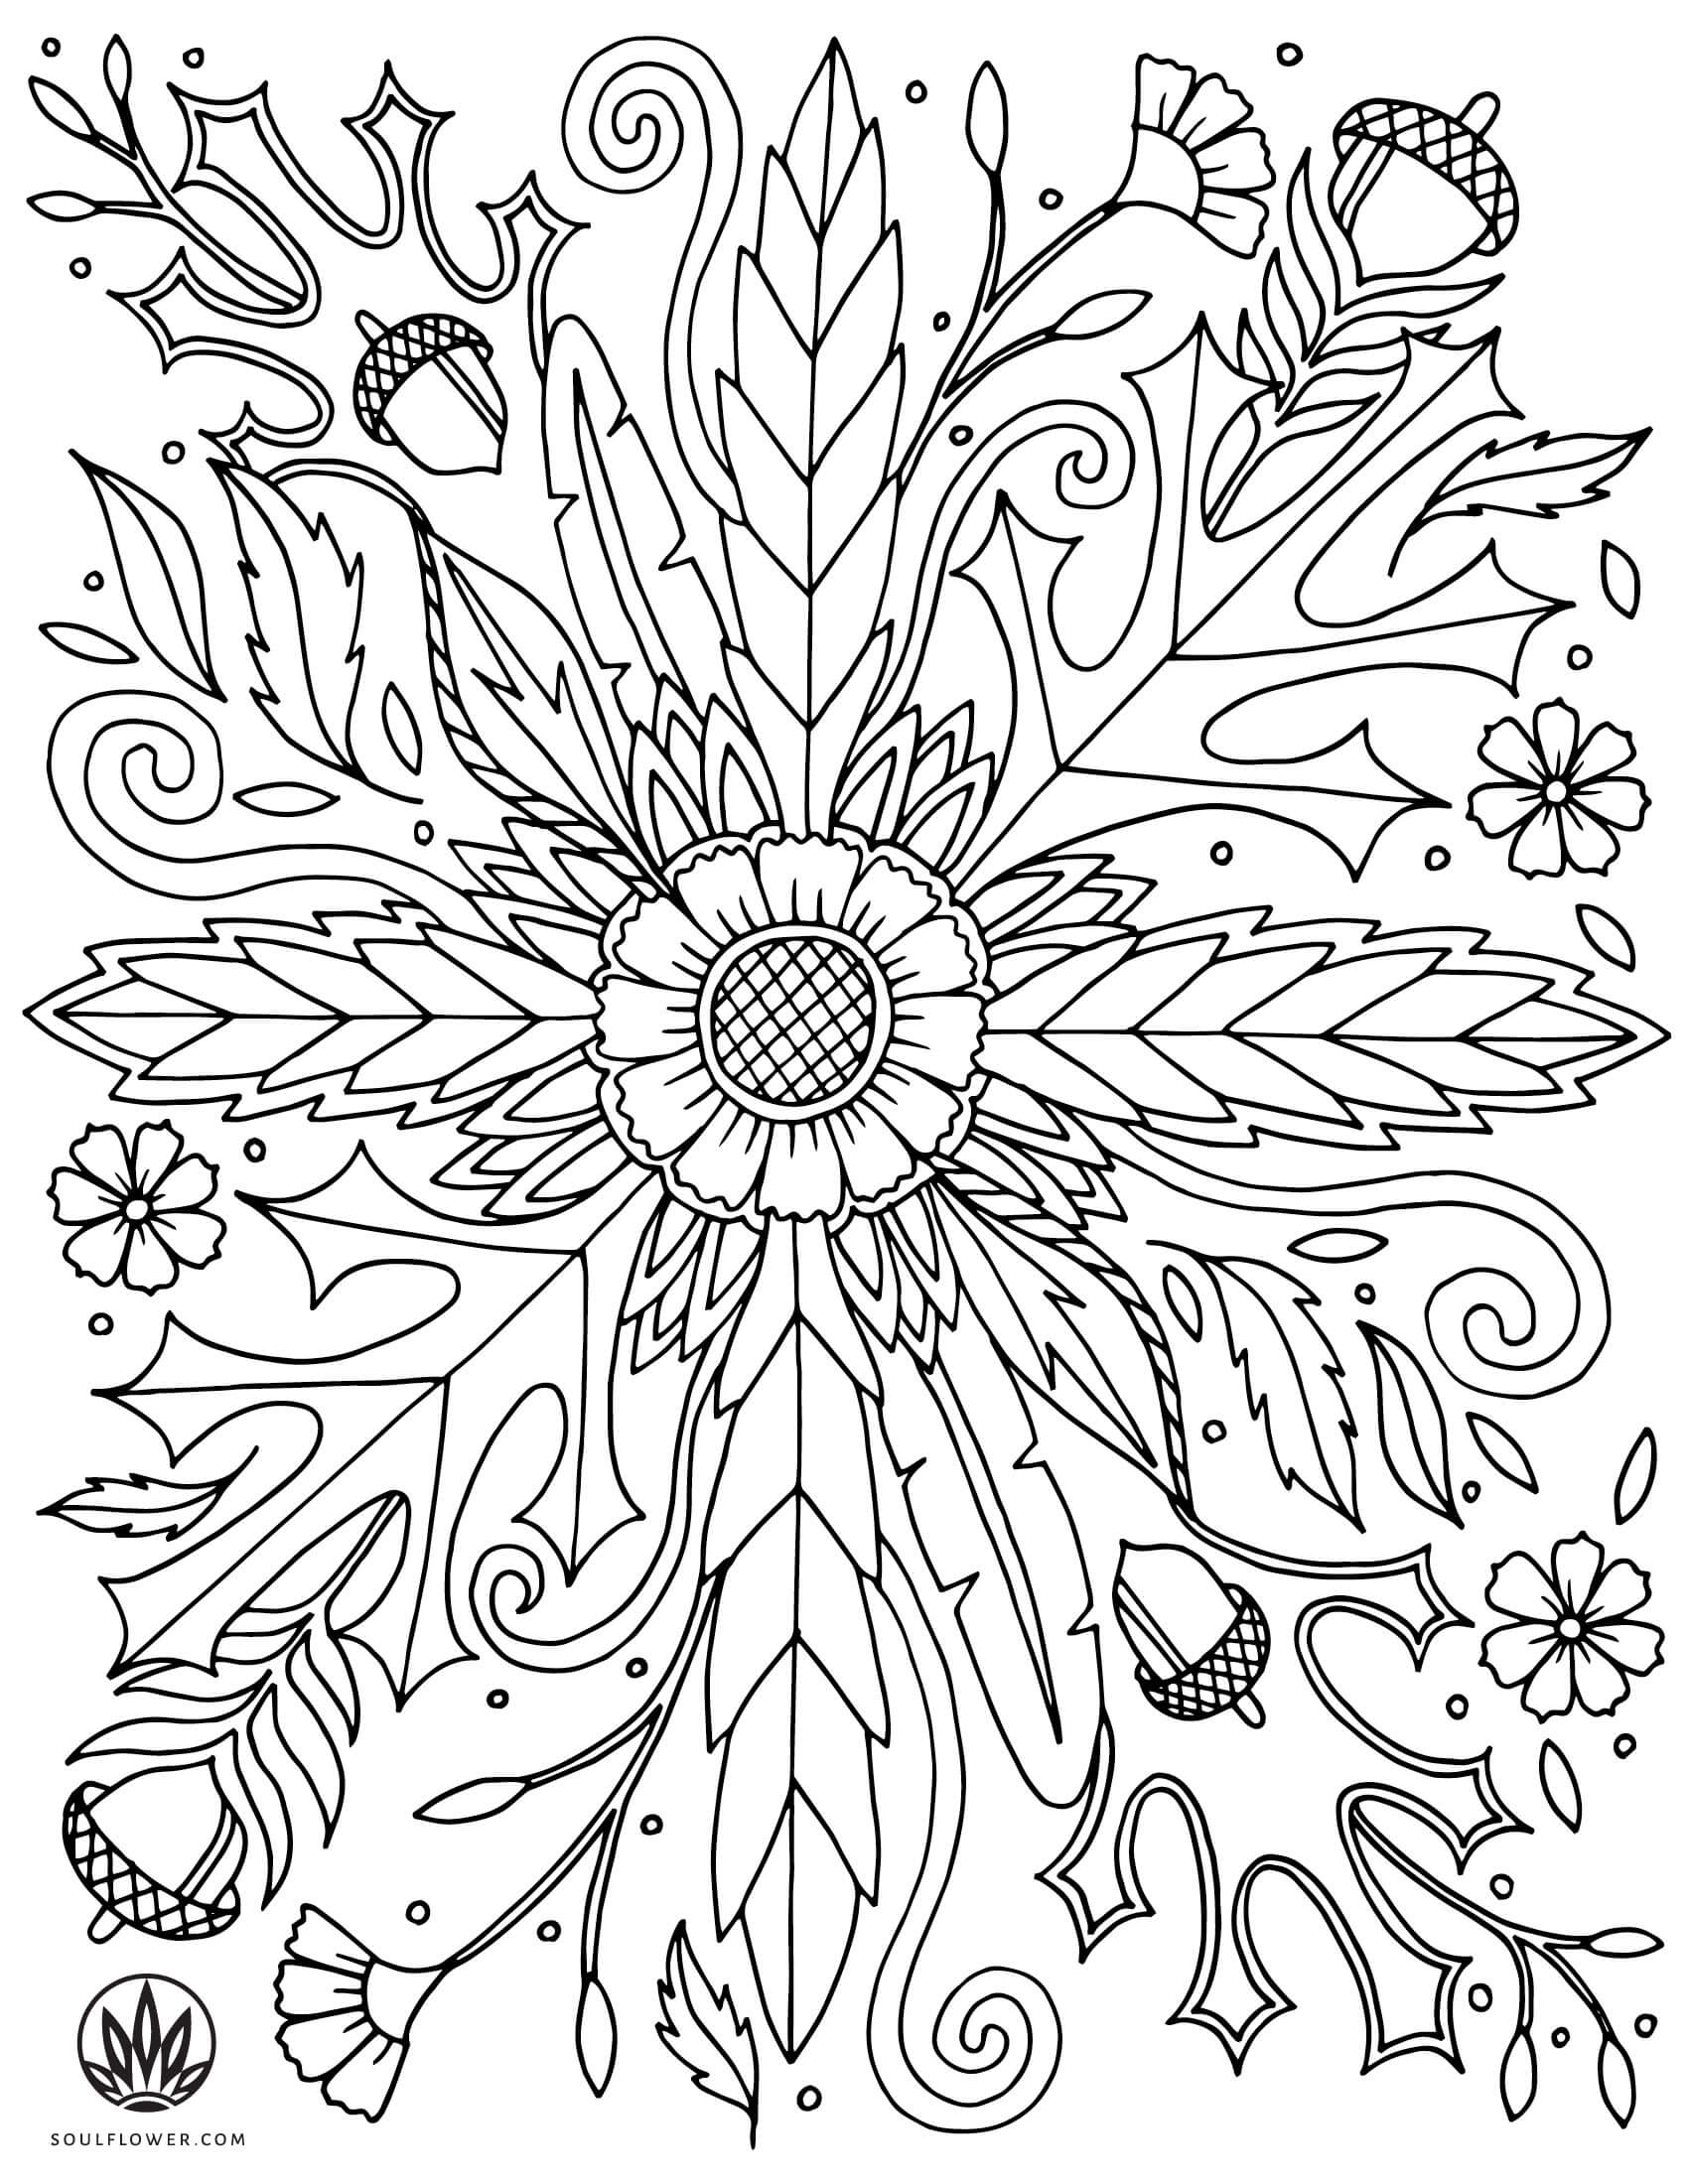 soulflower coloring page thanksgiving 1 - DIY Thanksgiving Coloring Page